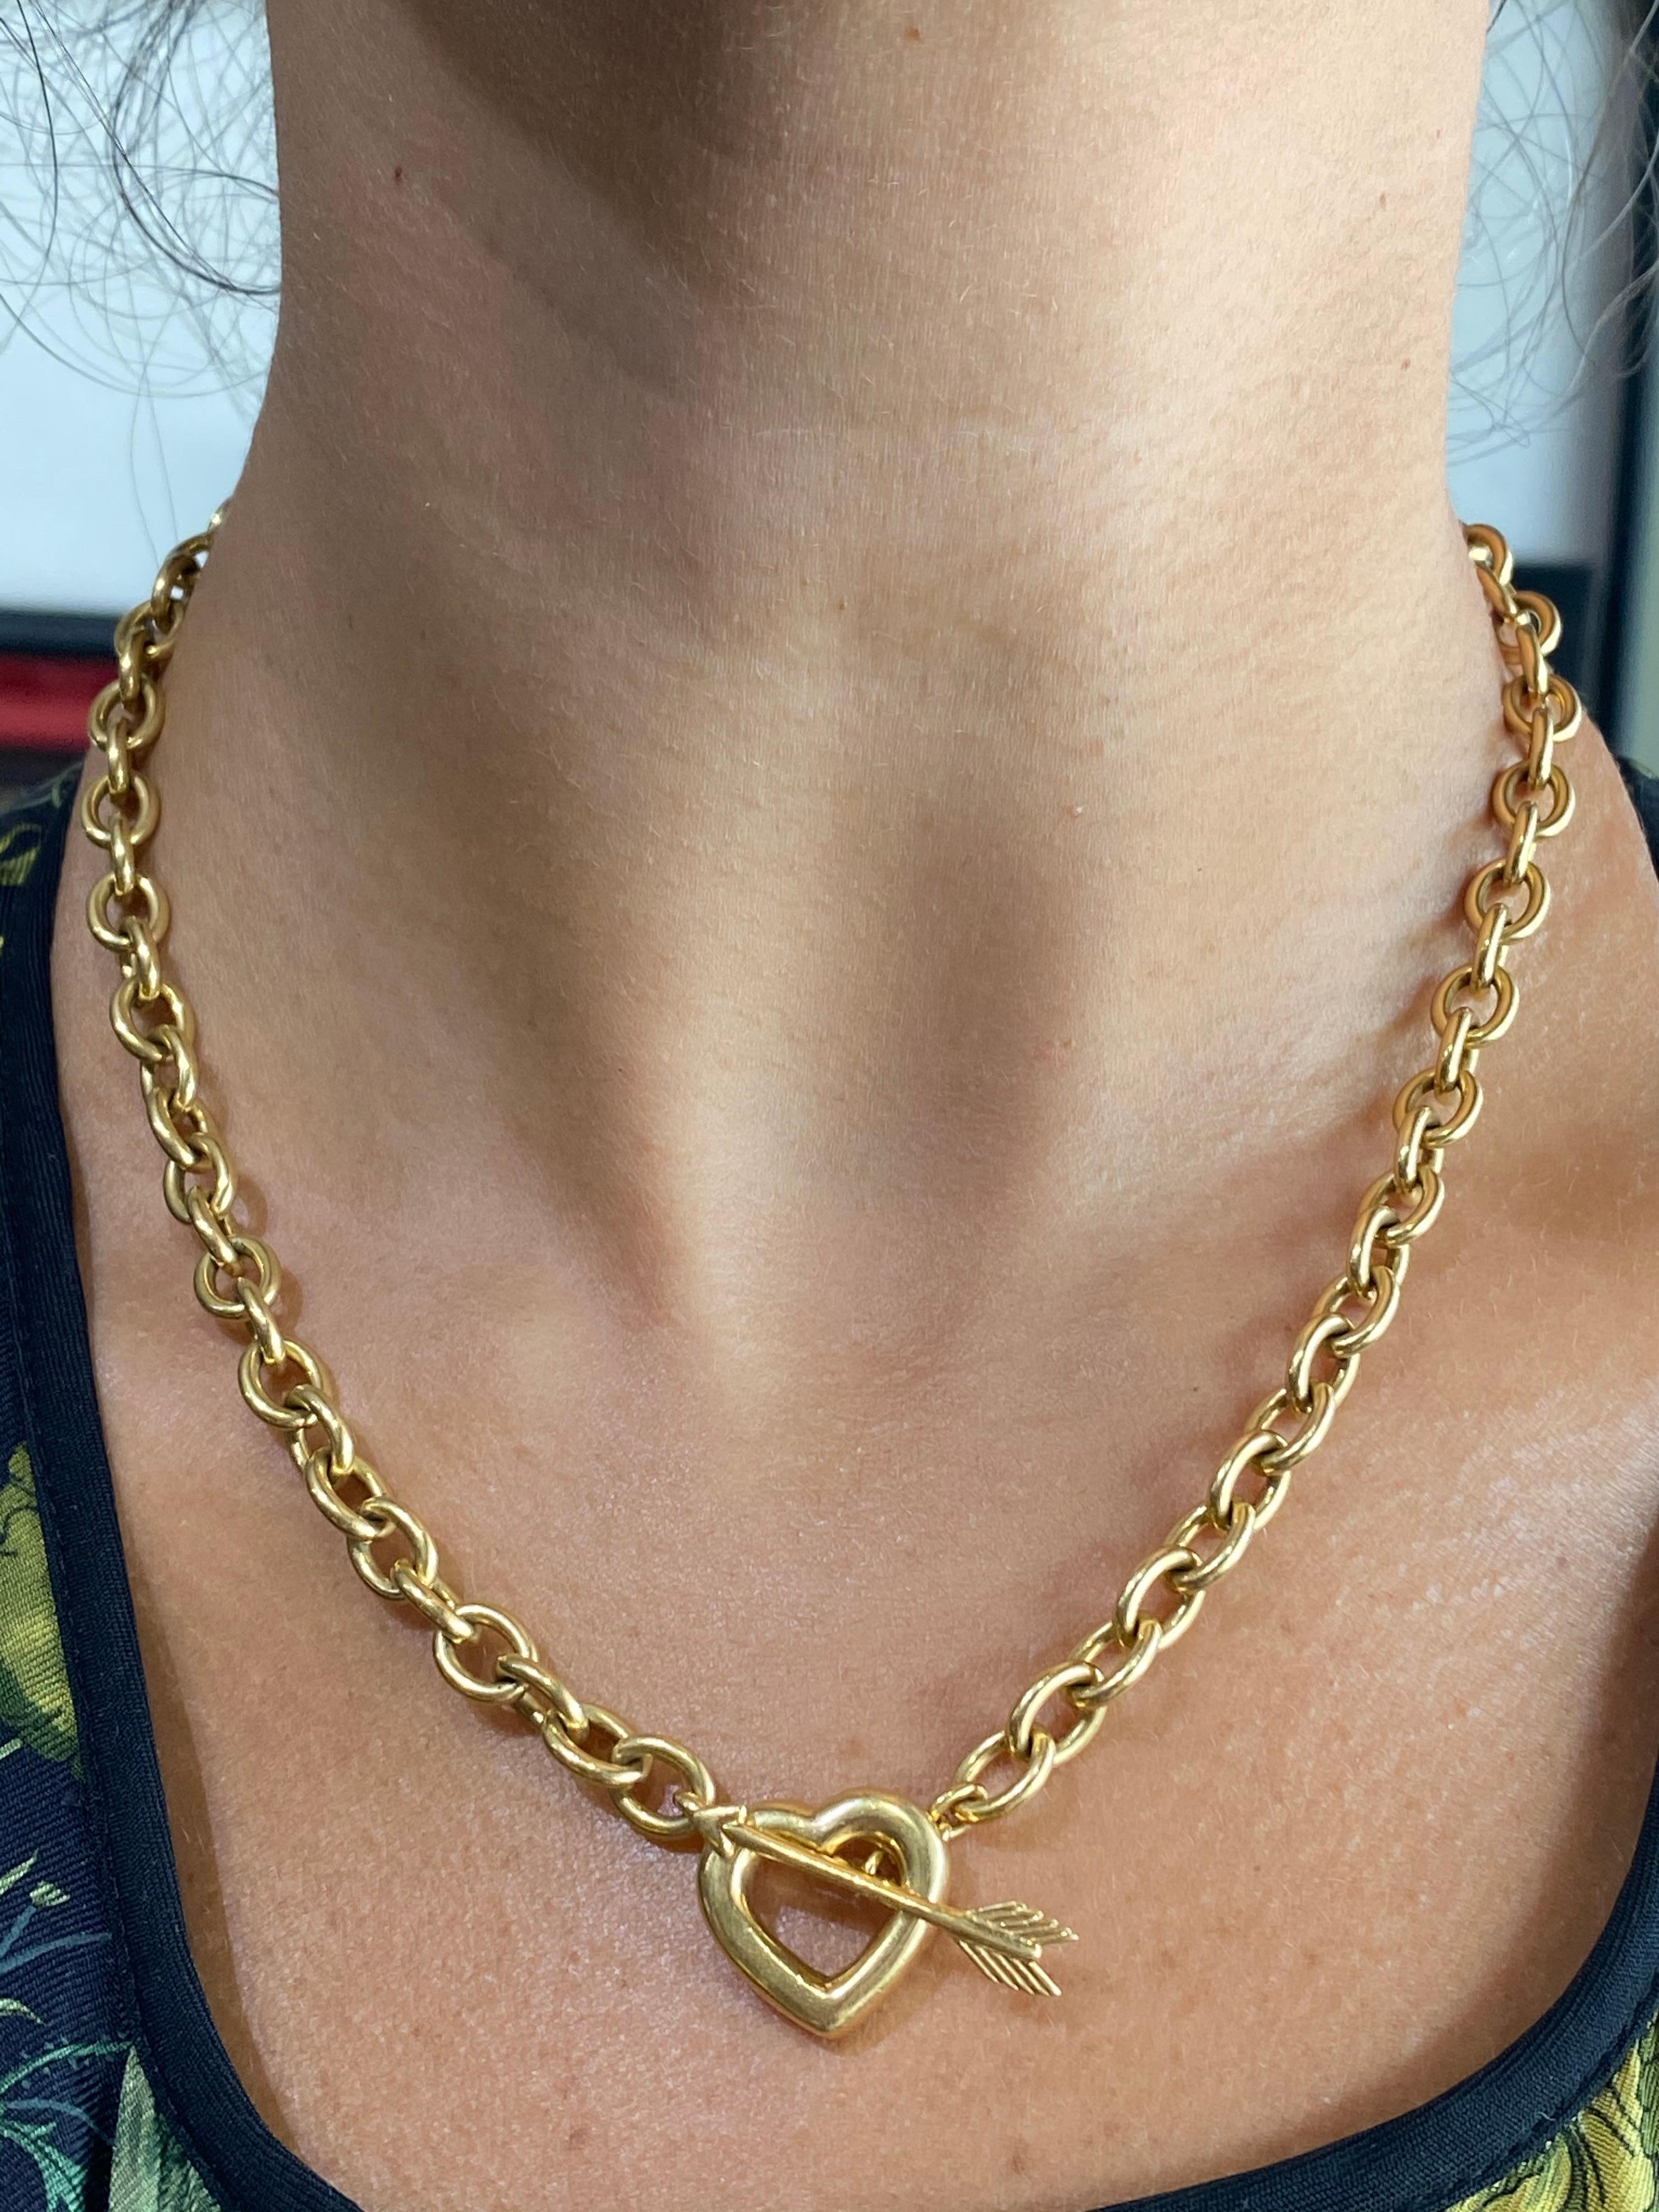 Vintage Tiffany & Co. Toggle Yellow Gold Heart and Error Link Chain Necklace  2